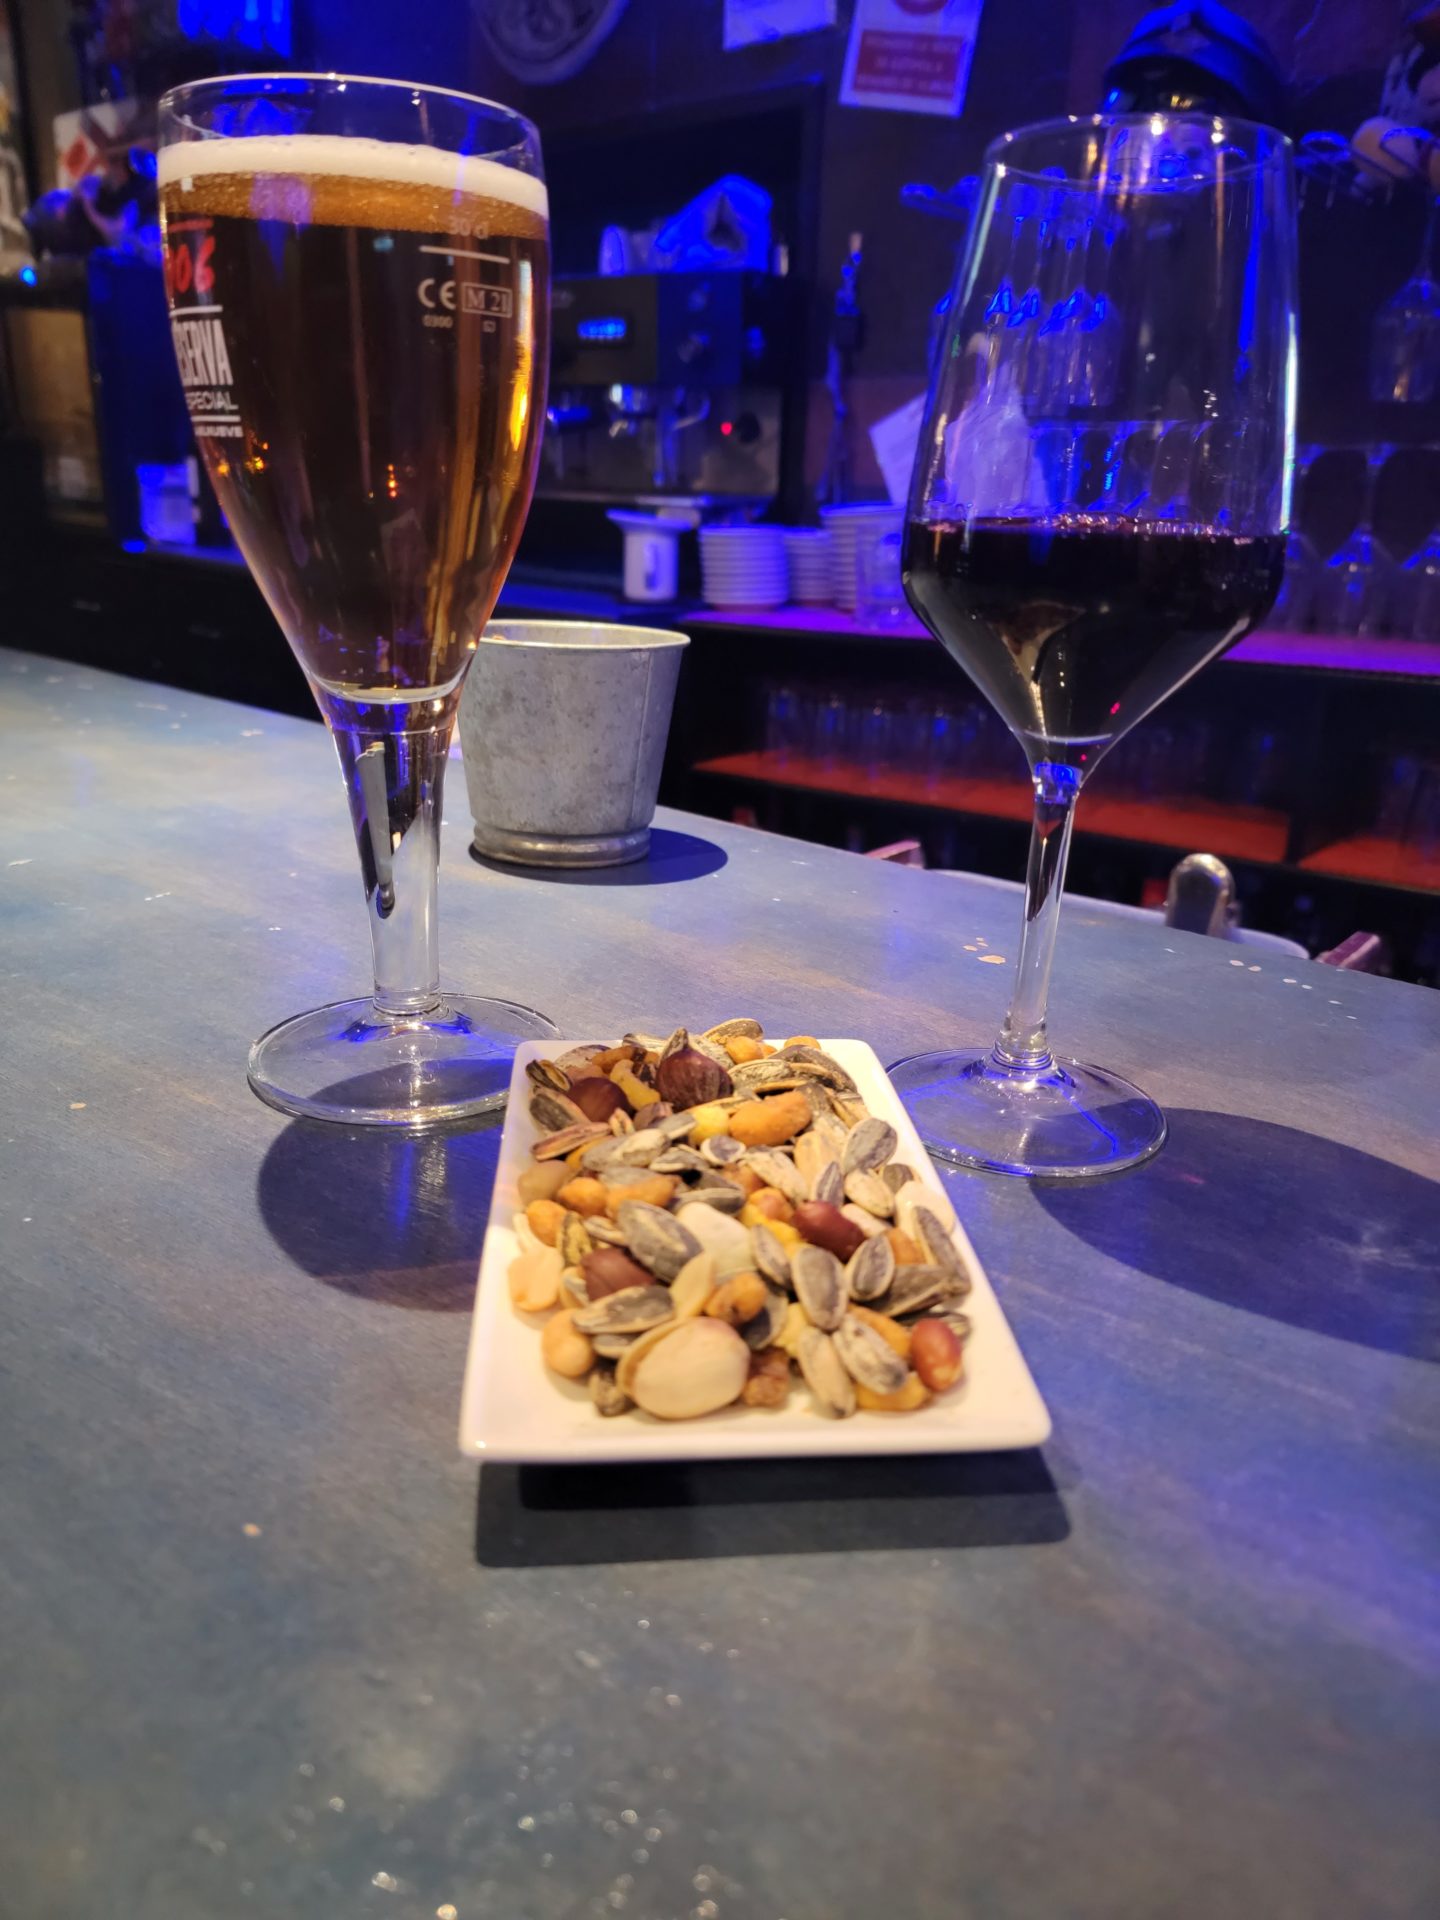 a plate of nuts and a glass of wine